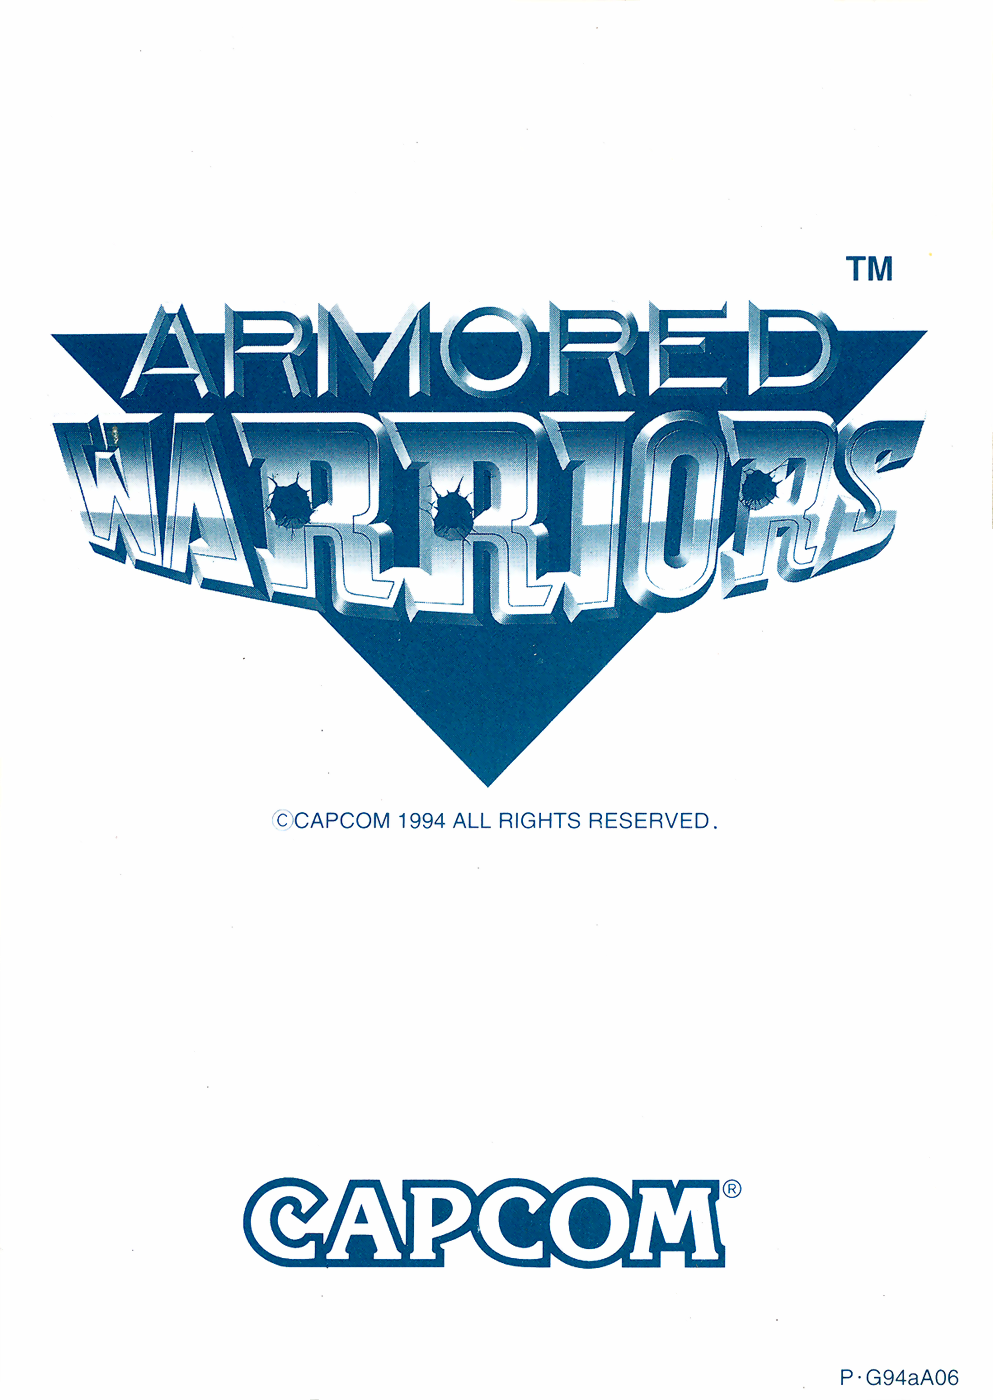 Armored Warriors (USA 941024) flyer